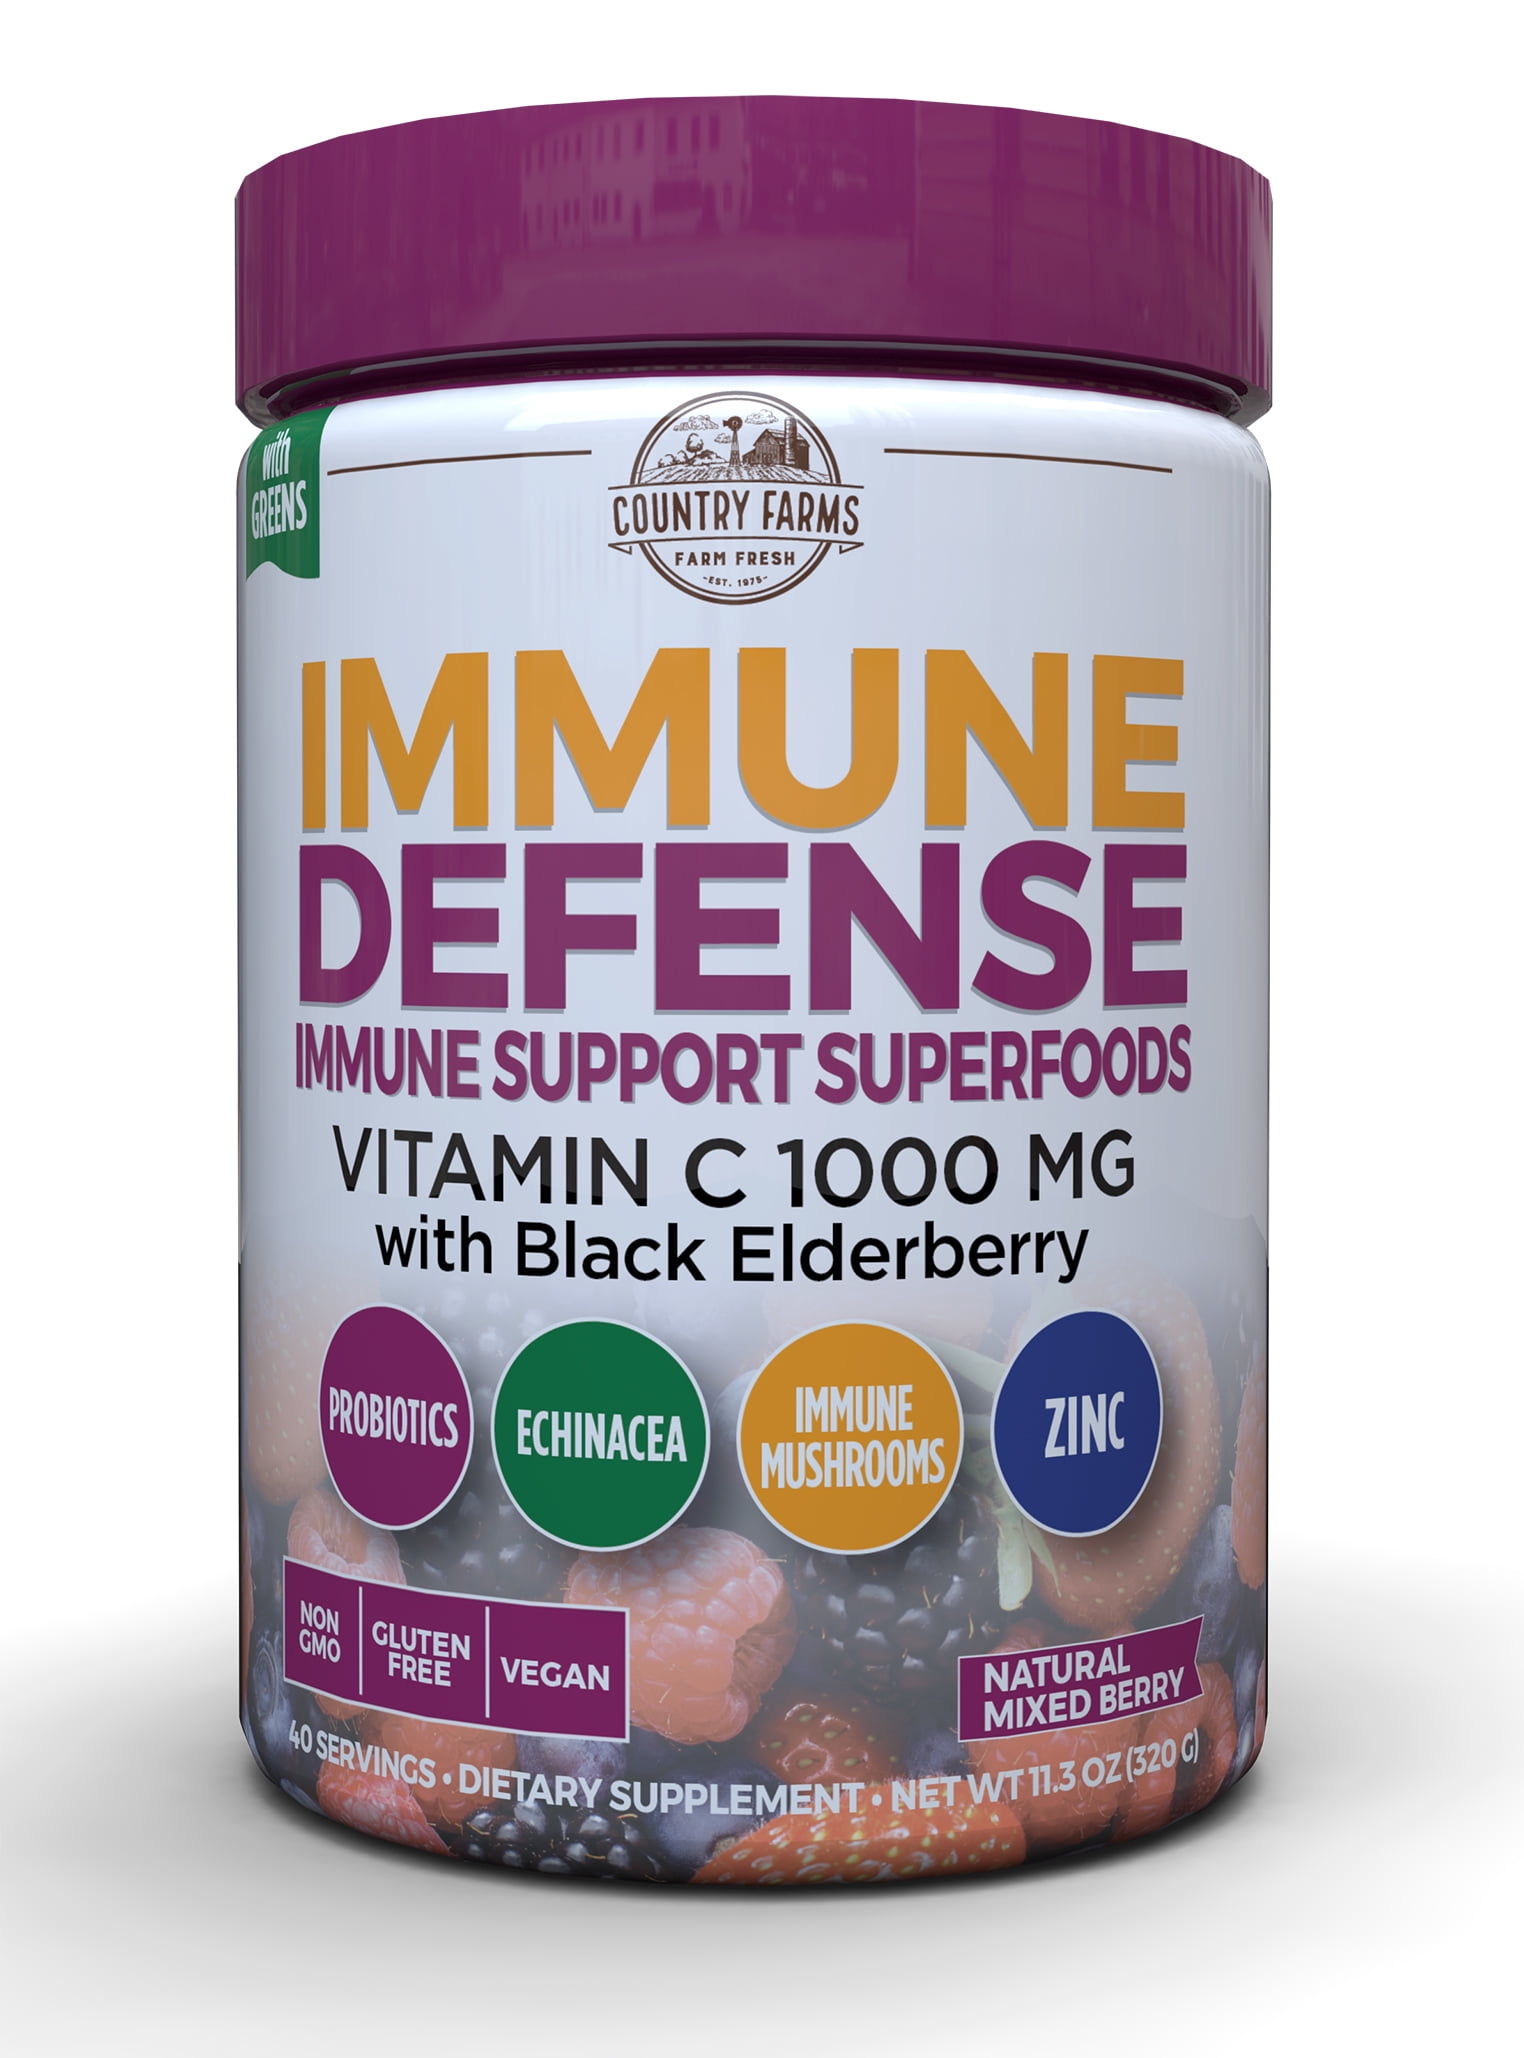 Country Farms Immune Defense Superfoods Drink Mix Dietary Supplement, Immune Support, Vitamin C, Zinc, Echinacea, Mushrooms, Hydration, Powder Drink Mix, Berry Flavor Flavor, 40 Servings